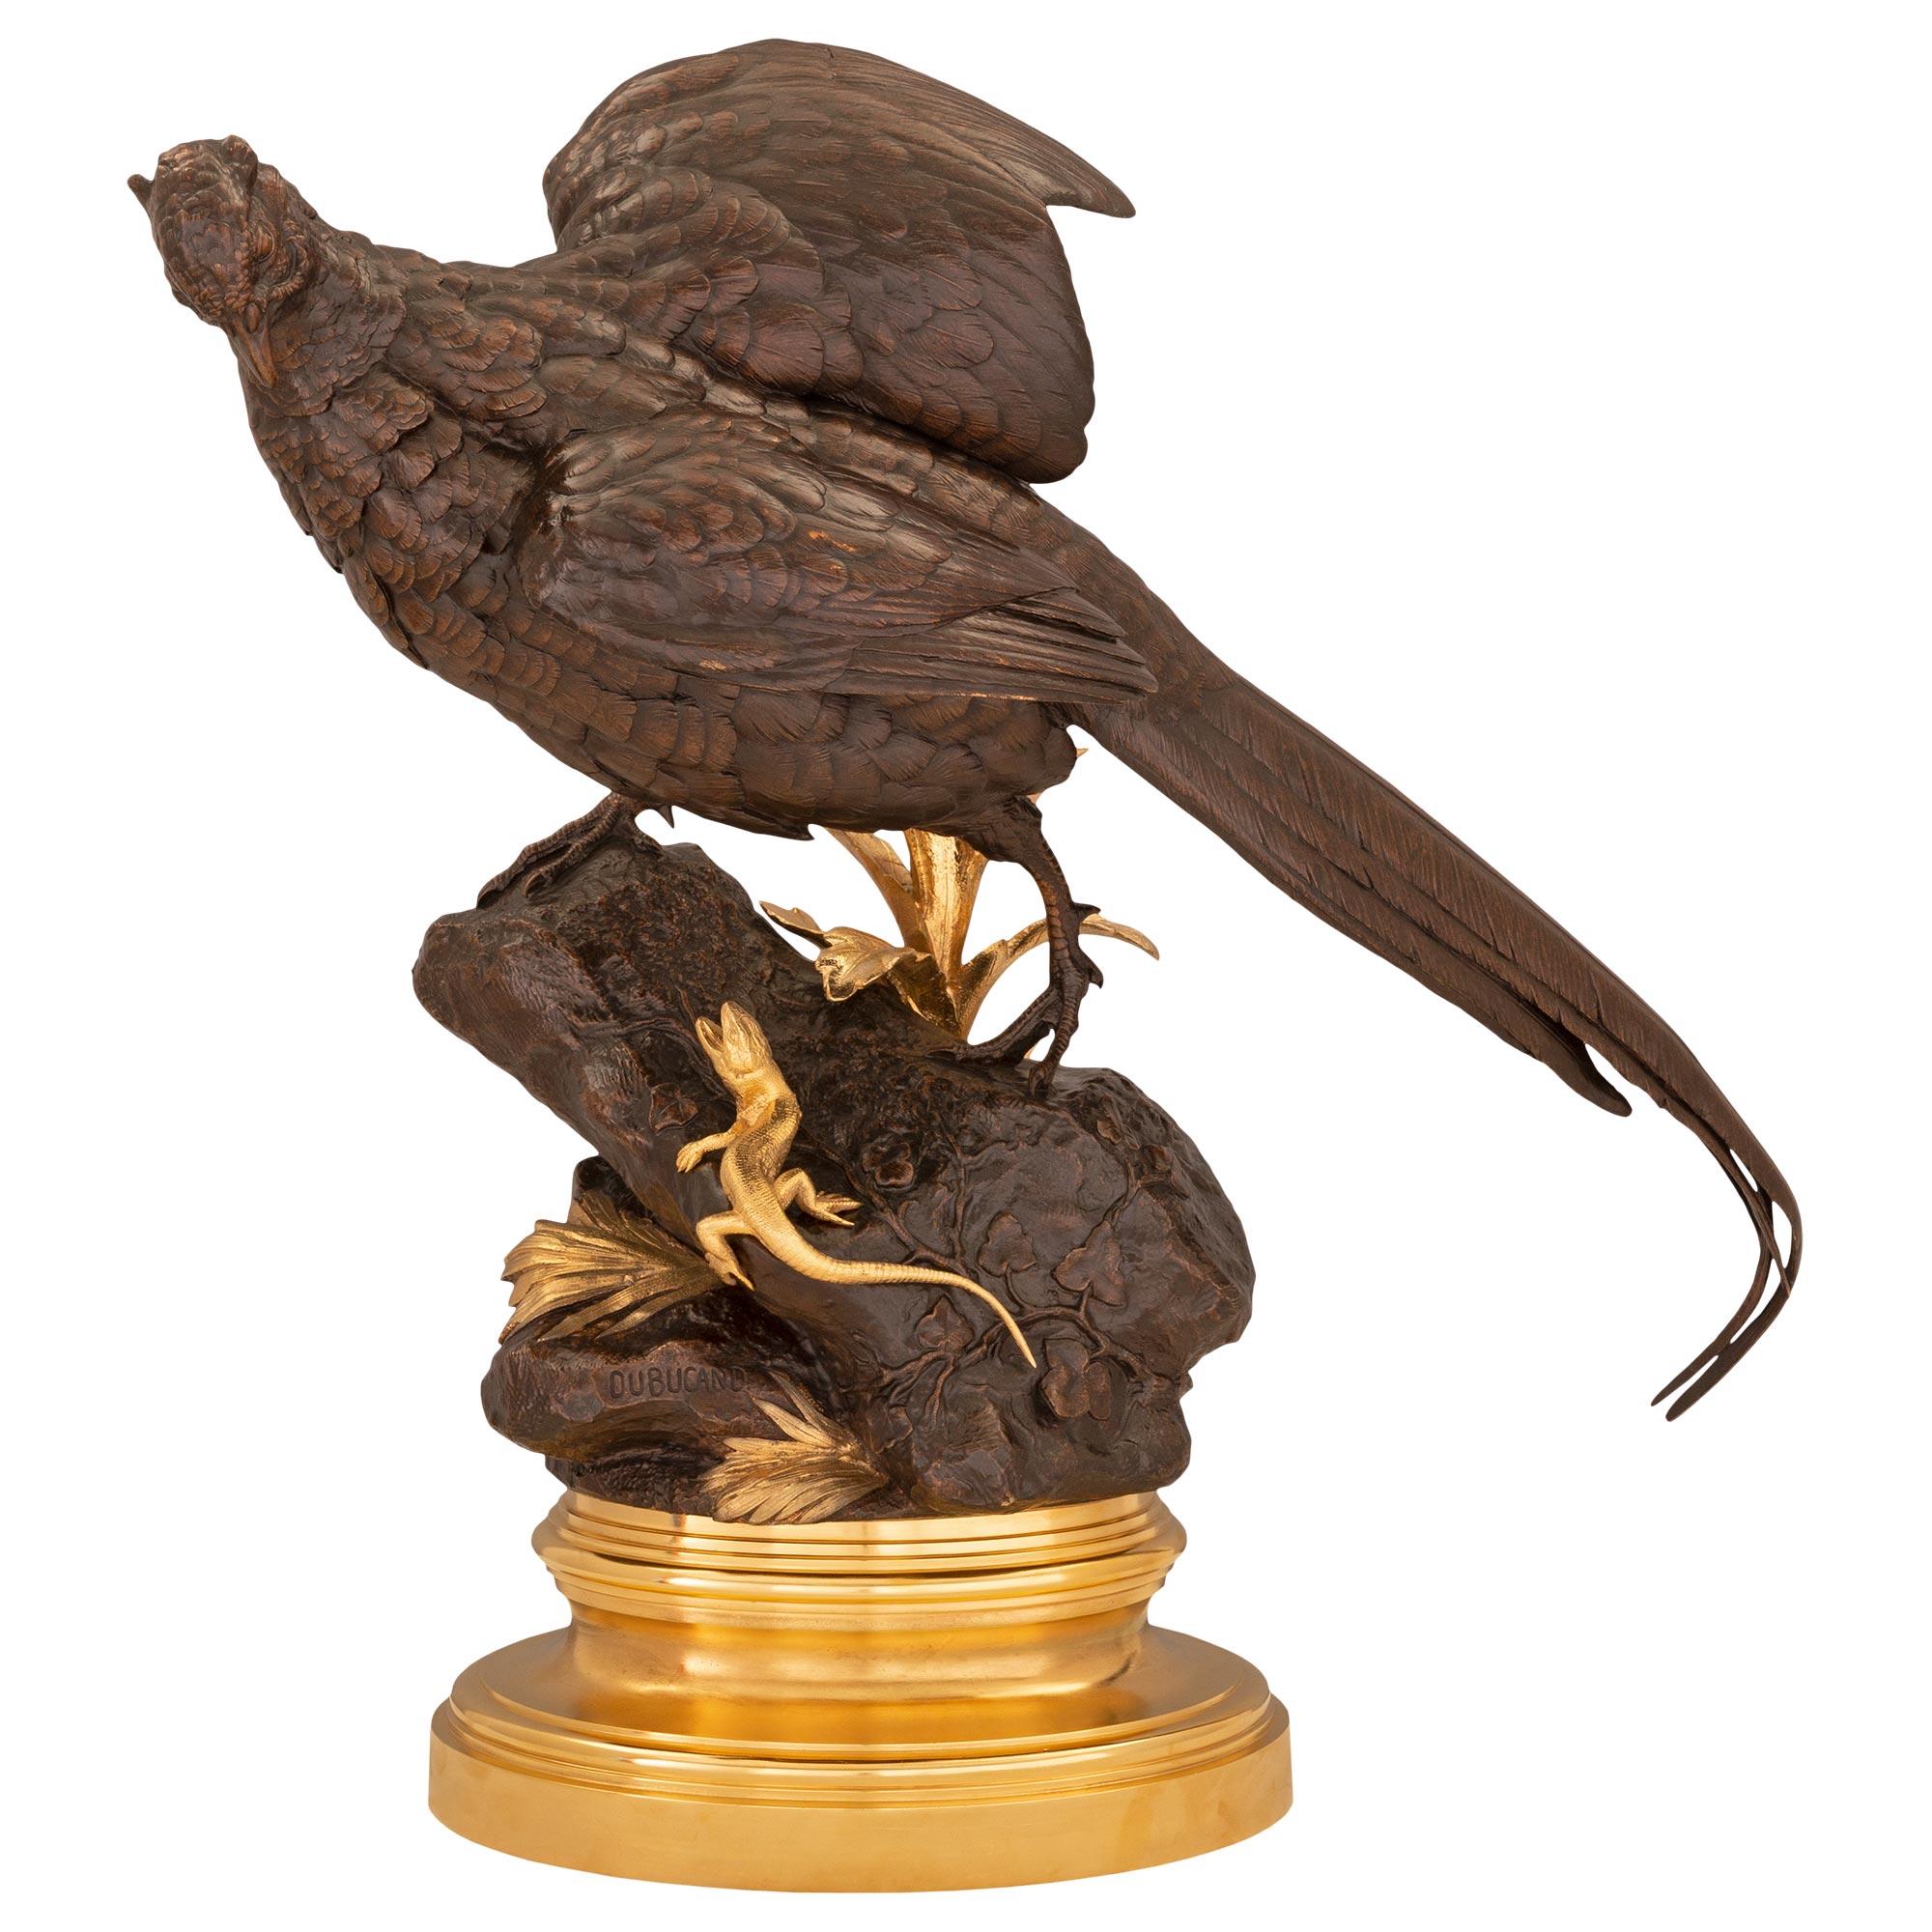 A striking and high quality French 19th century Louis XVI st. ormolu and patinated bronze statue of a pheasant, signed Dubucand. The impressive statue is raised by a circular mottled stepped ormolu base below the wonderfully executed ground like